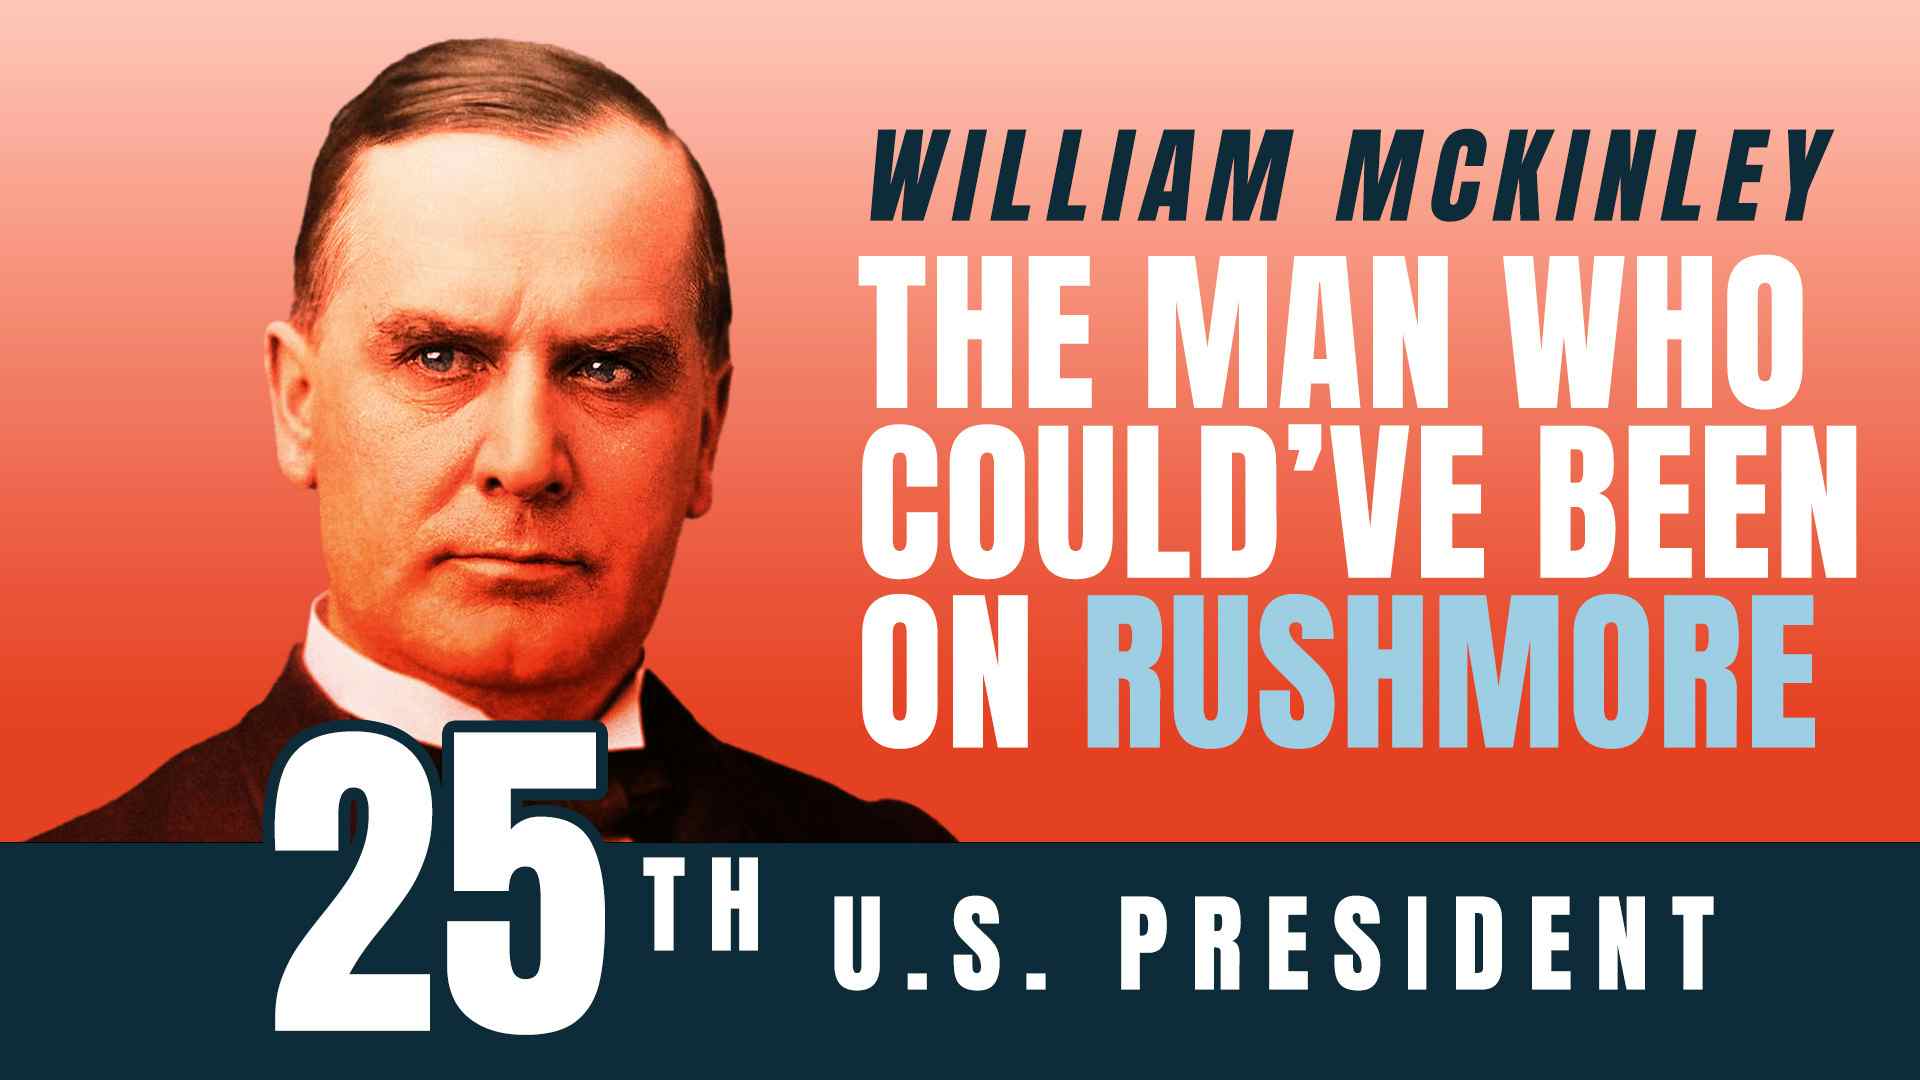 William McKinley: The Man Who Could’ve Been on Rushmore